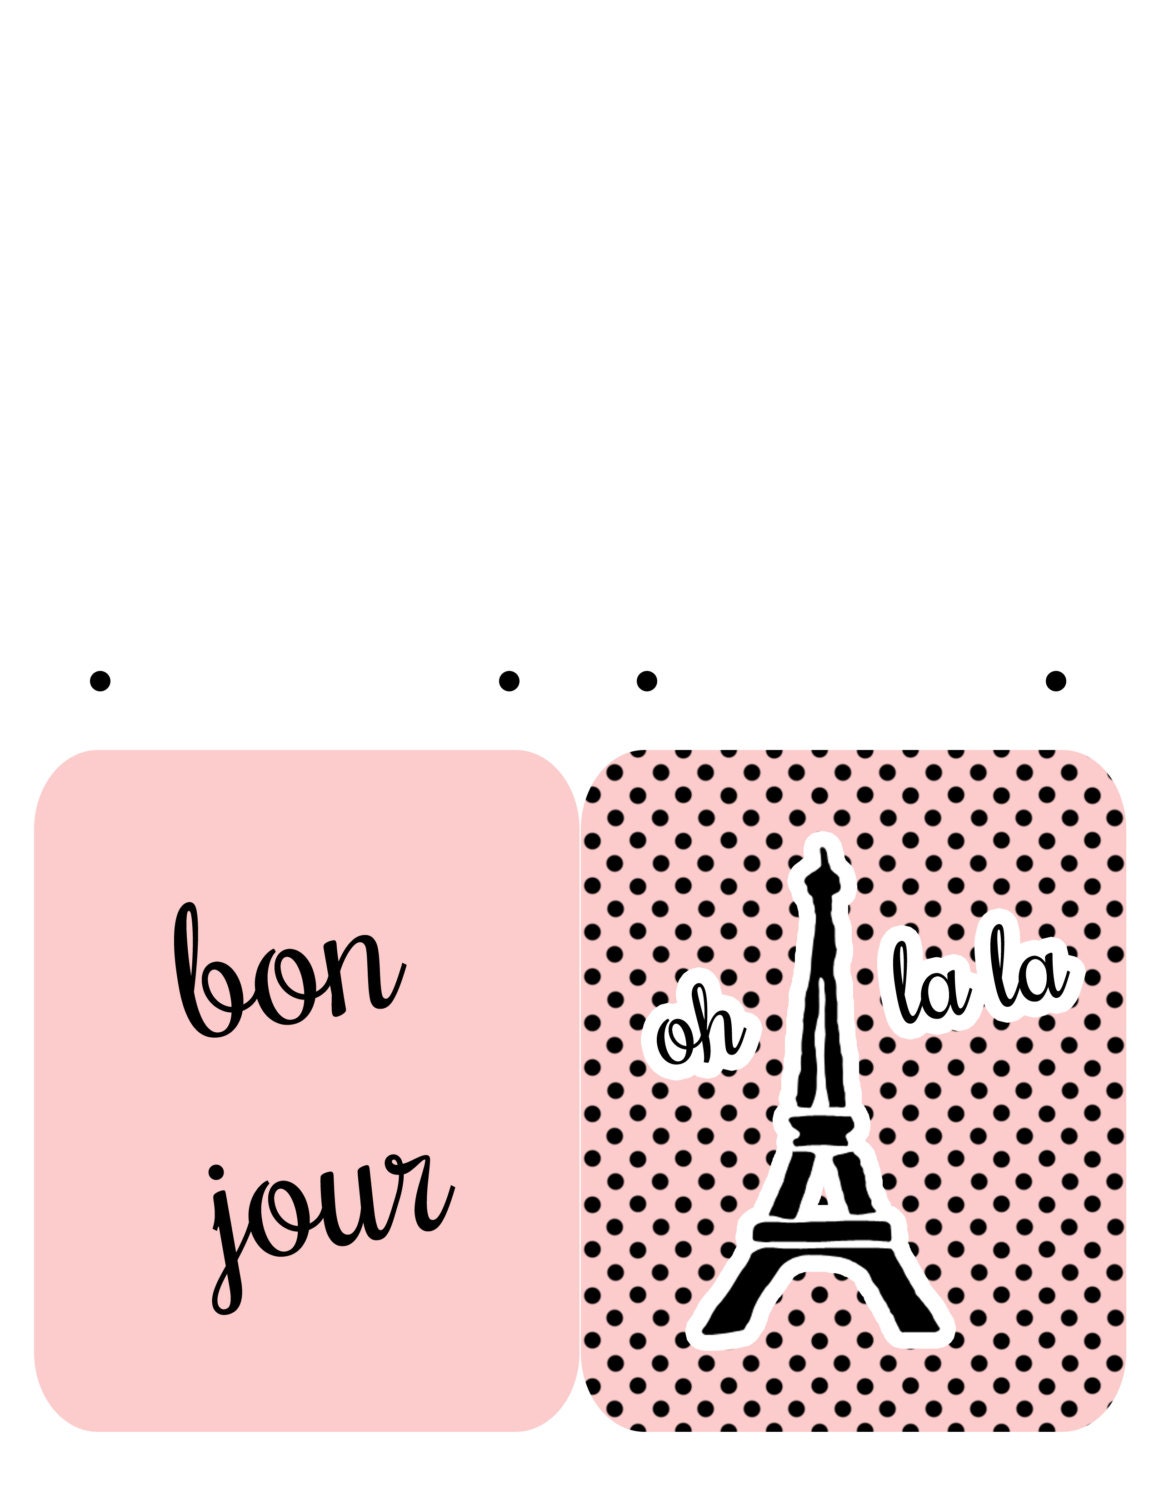 I LOVE PARIS classic French Printable Party Banner and - Etsy